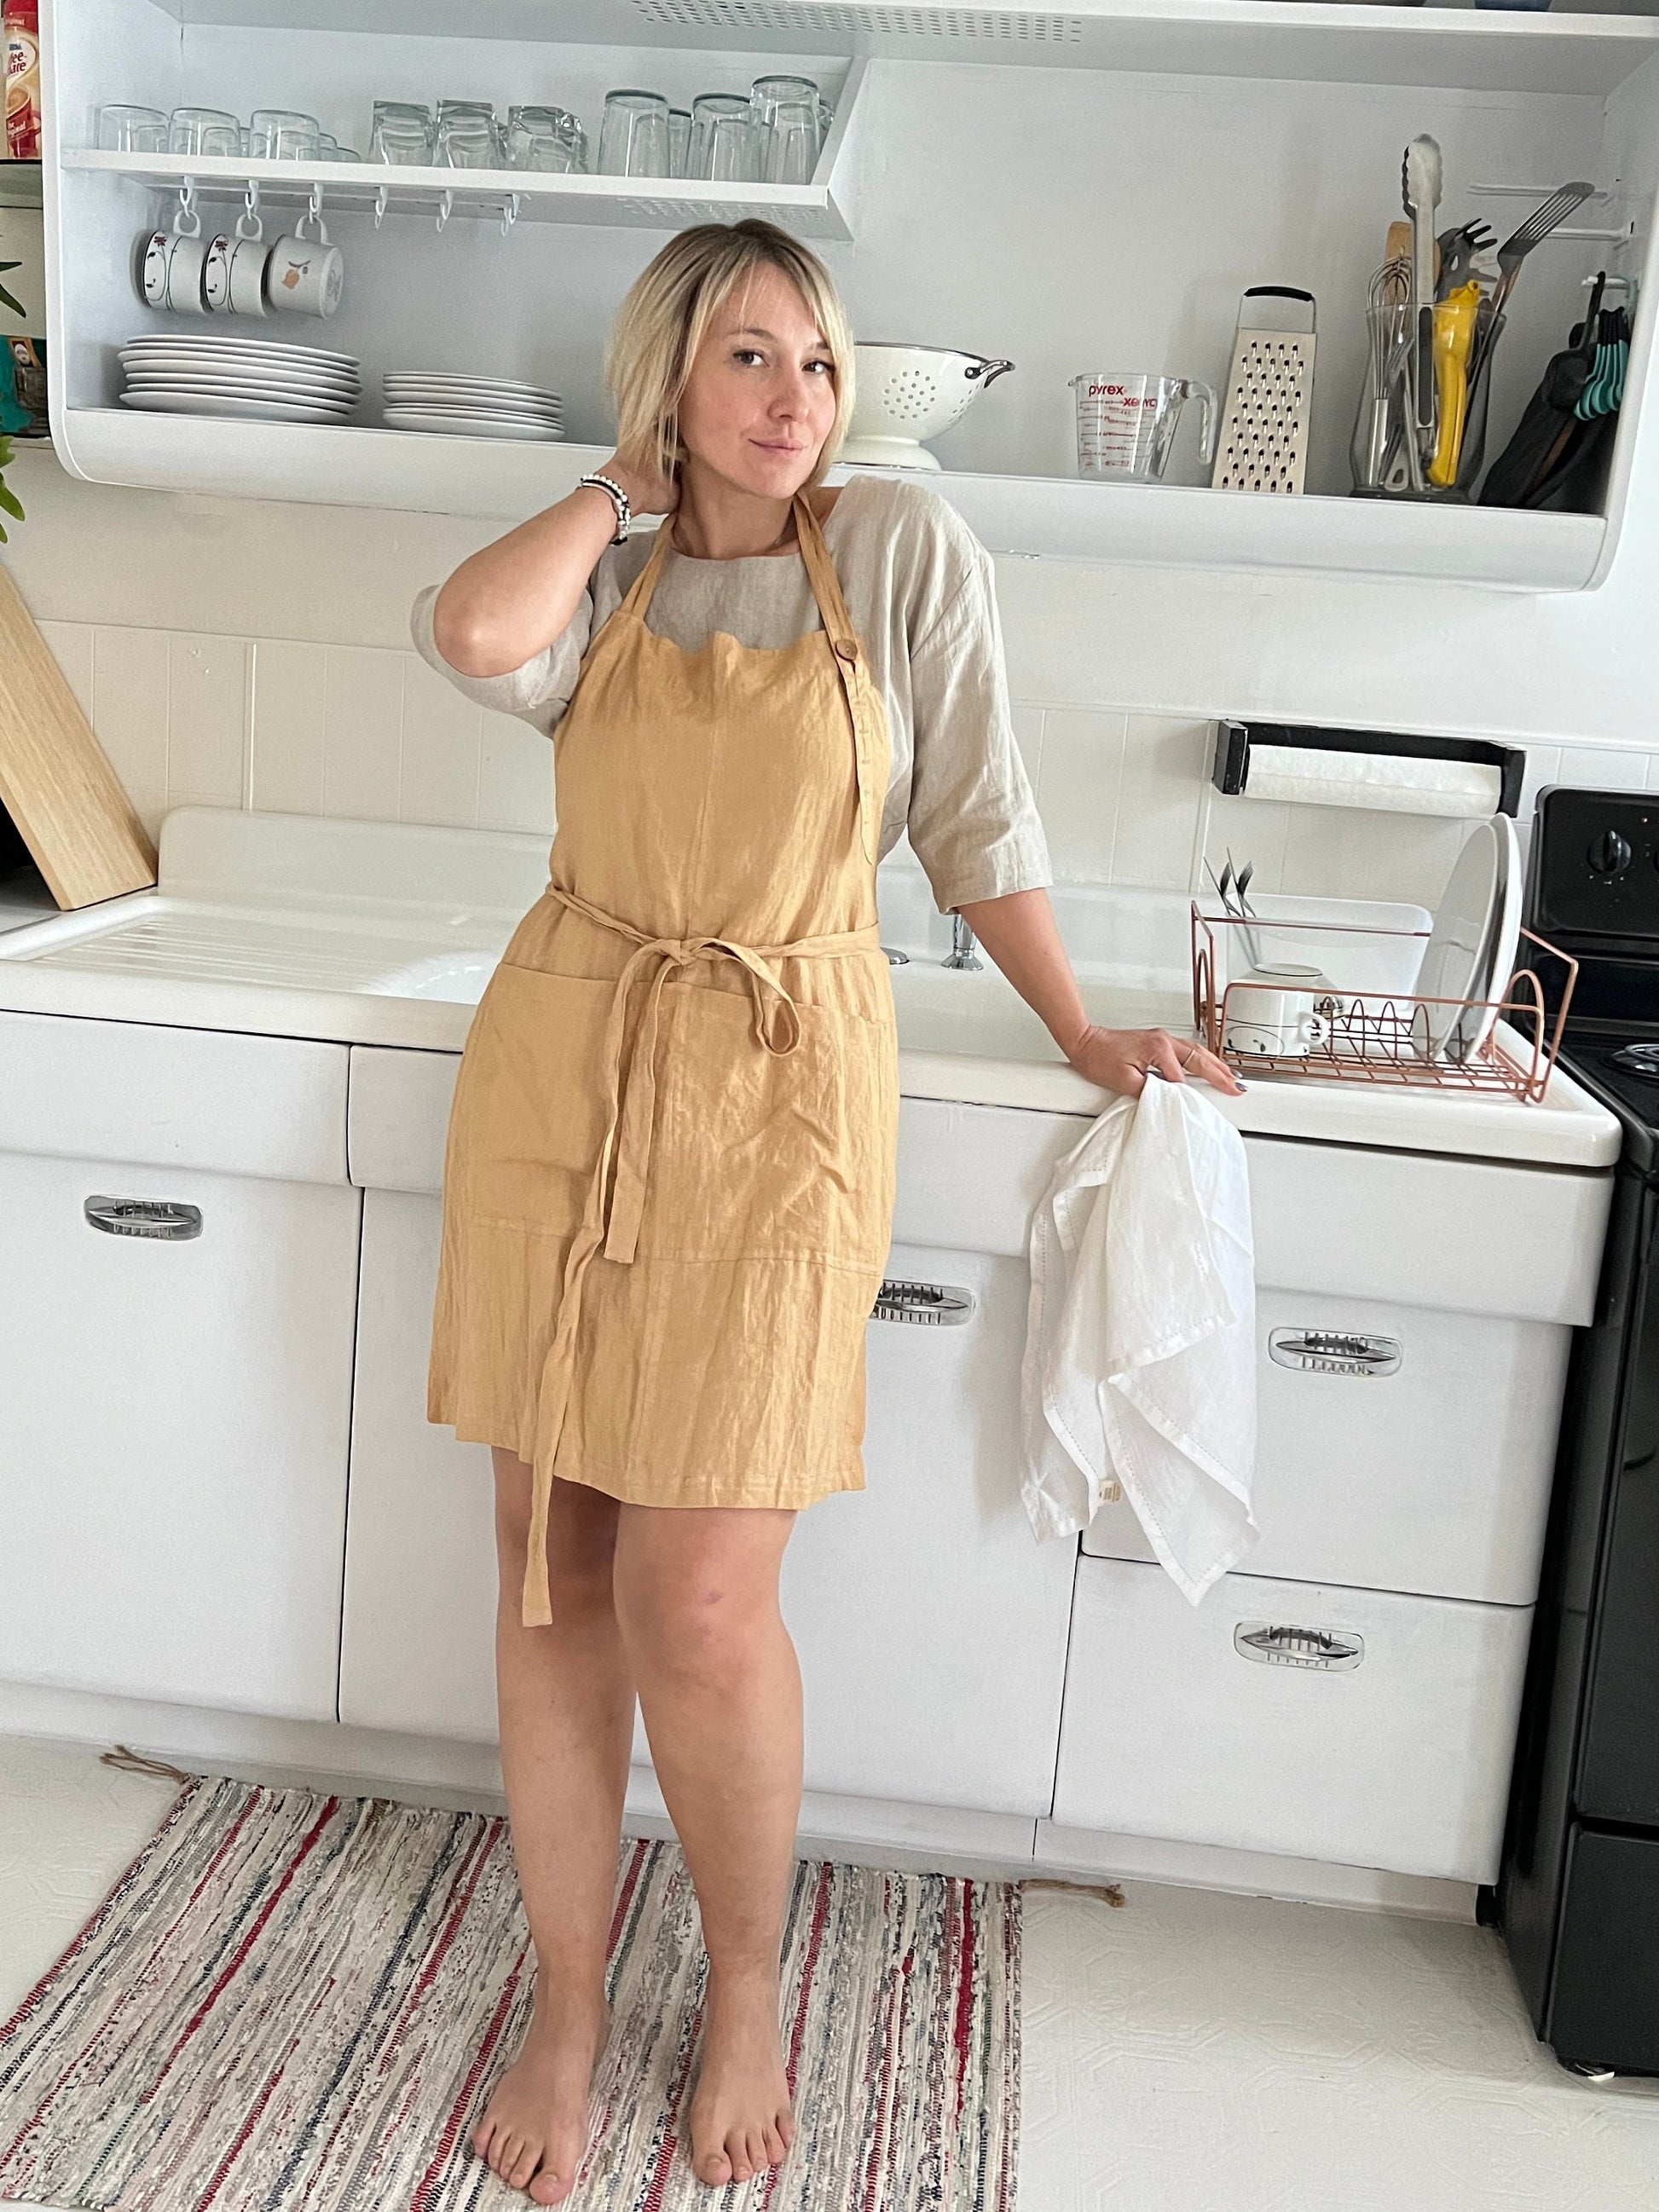 A thoughtful gift: Linen Apron with pockets for Christmas & Mother's Day